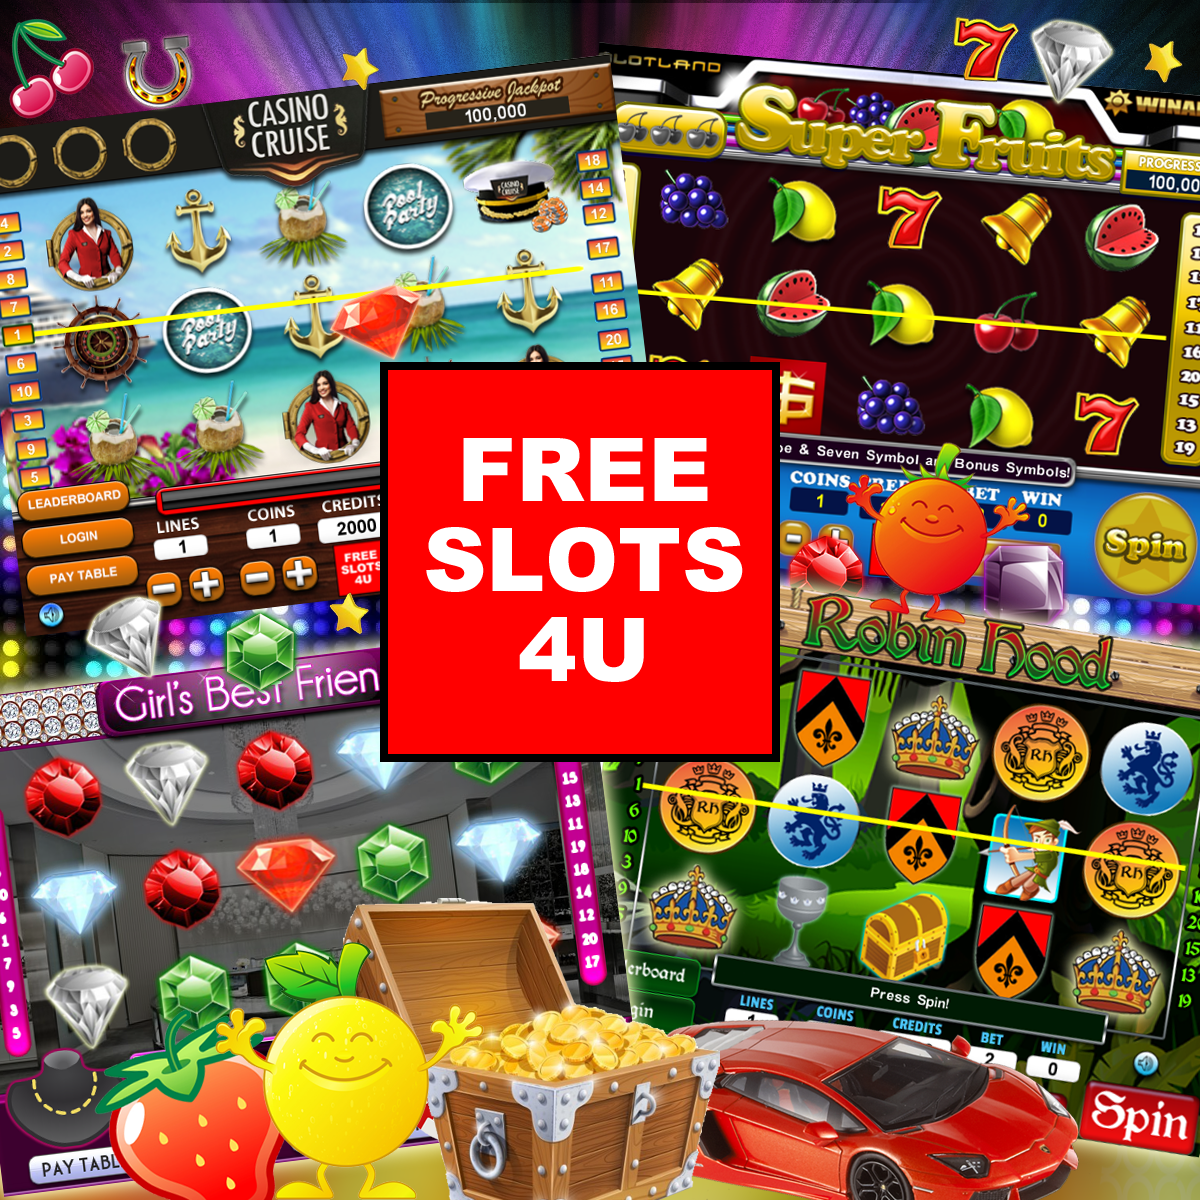 Play slots for free money